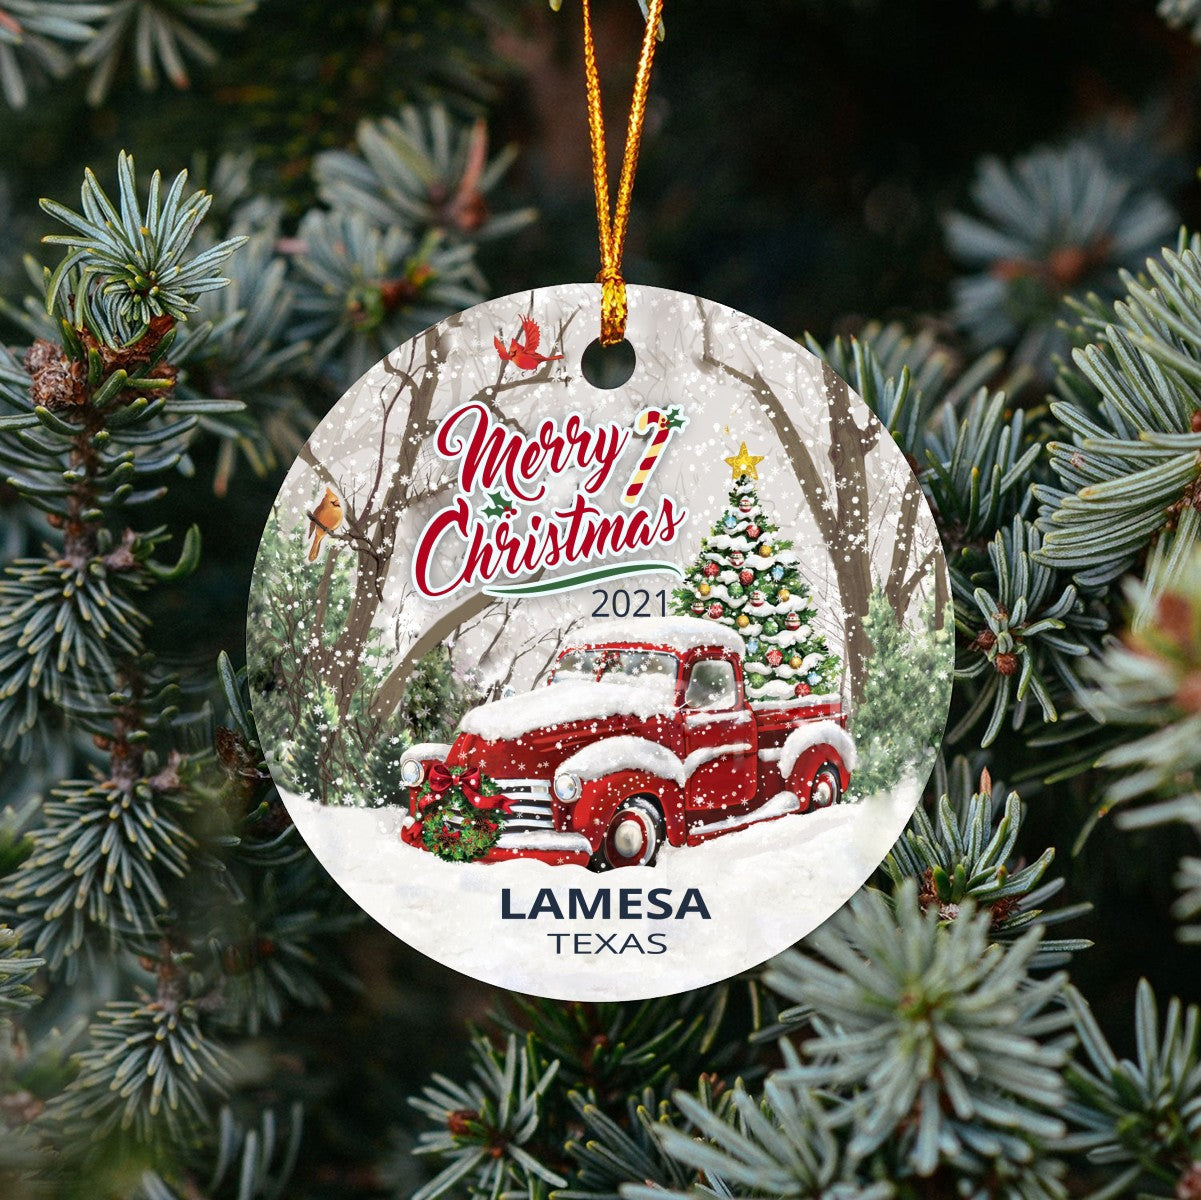 Christmas Tree Ornaments Lamesa - Ornament With Name City, State Lamesa Texas TX Ornament - Red Truck Xmas Ornaments 3'' Plastic Gift For Family, Friend And Housewarming